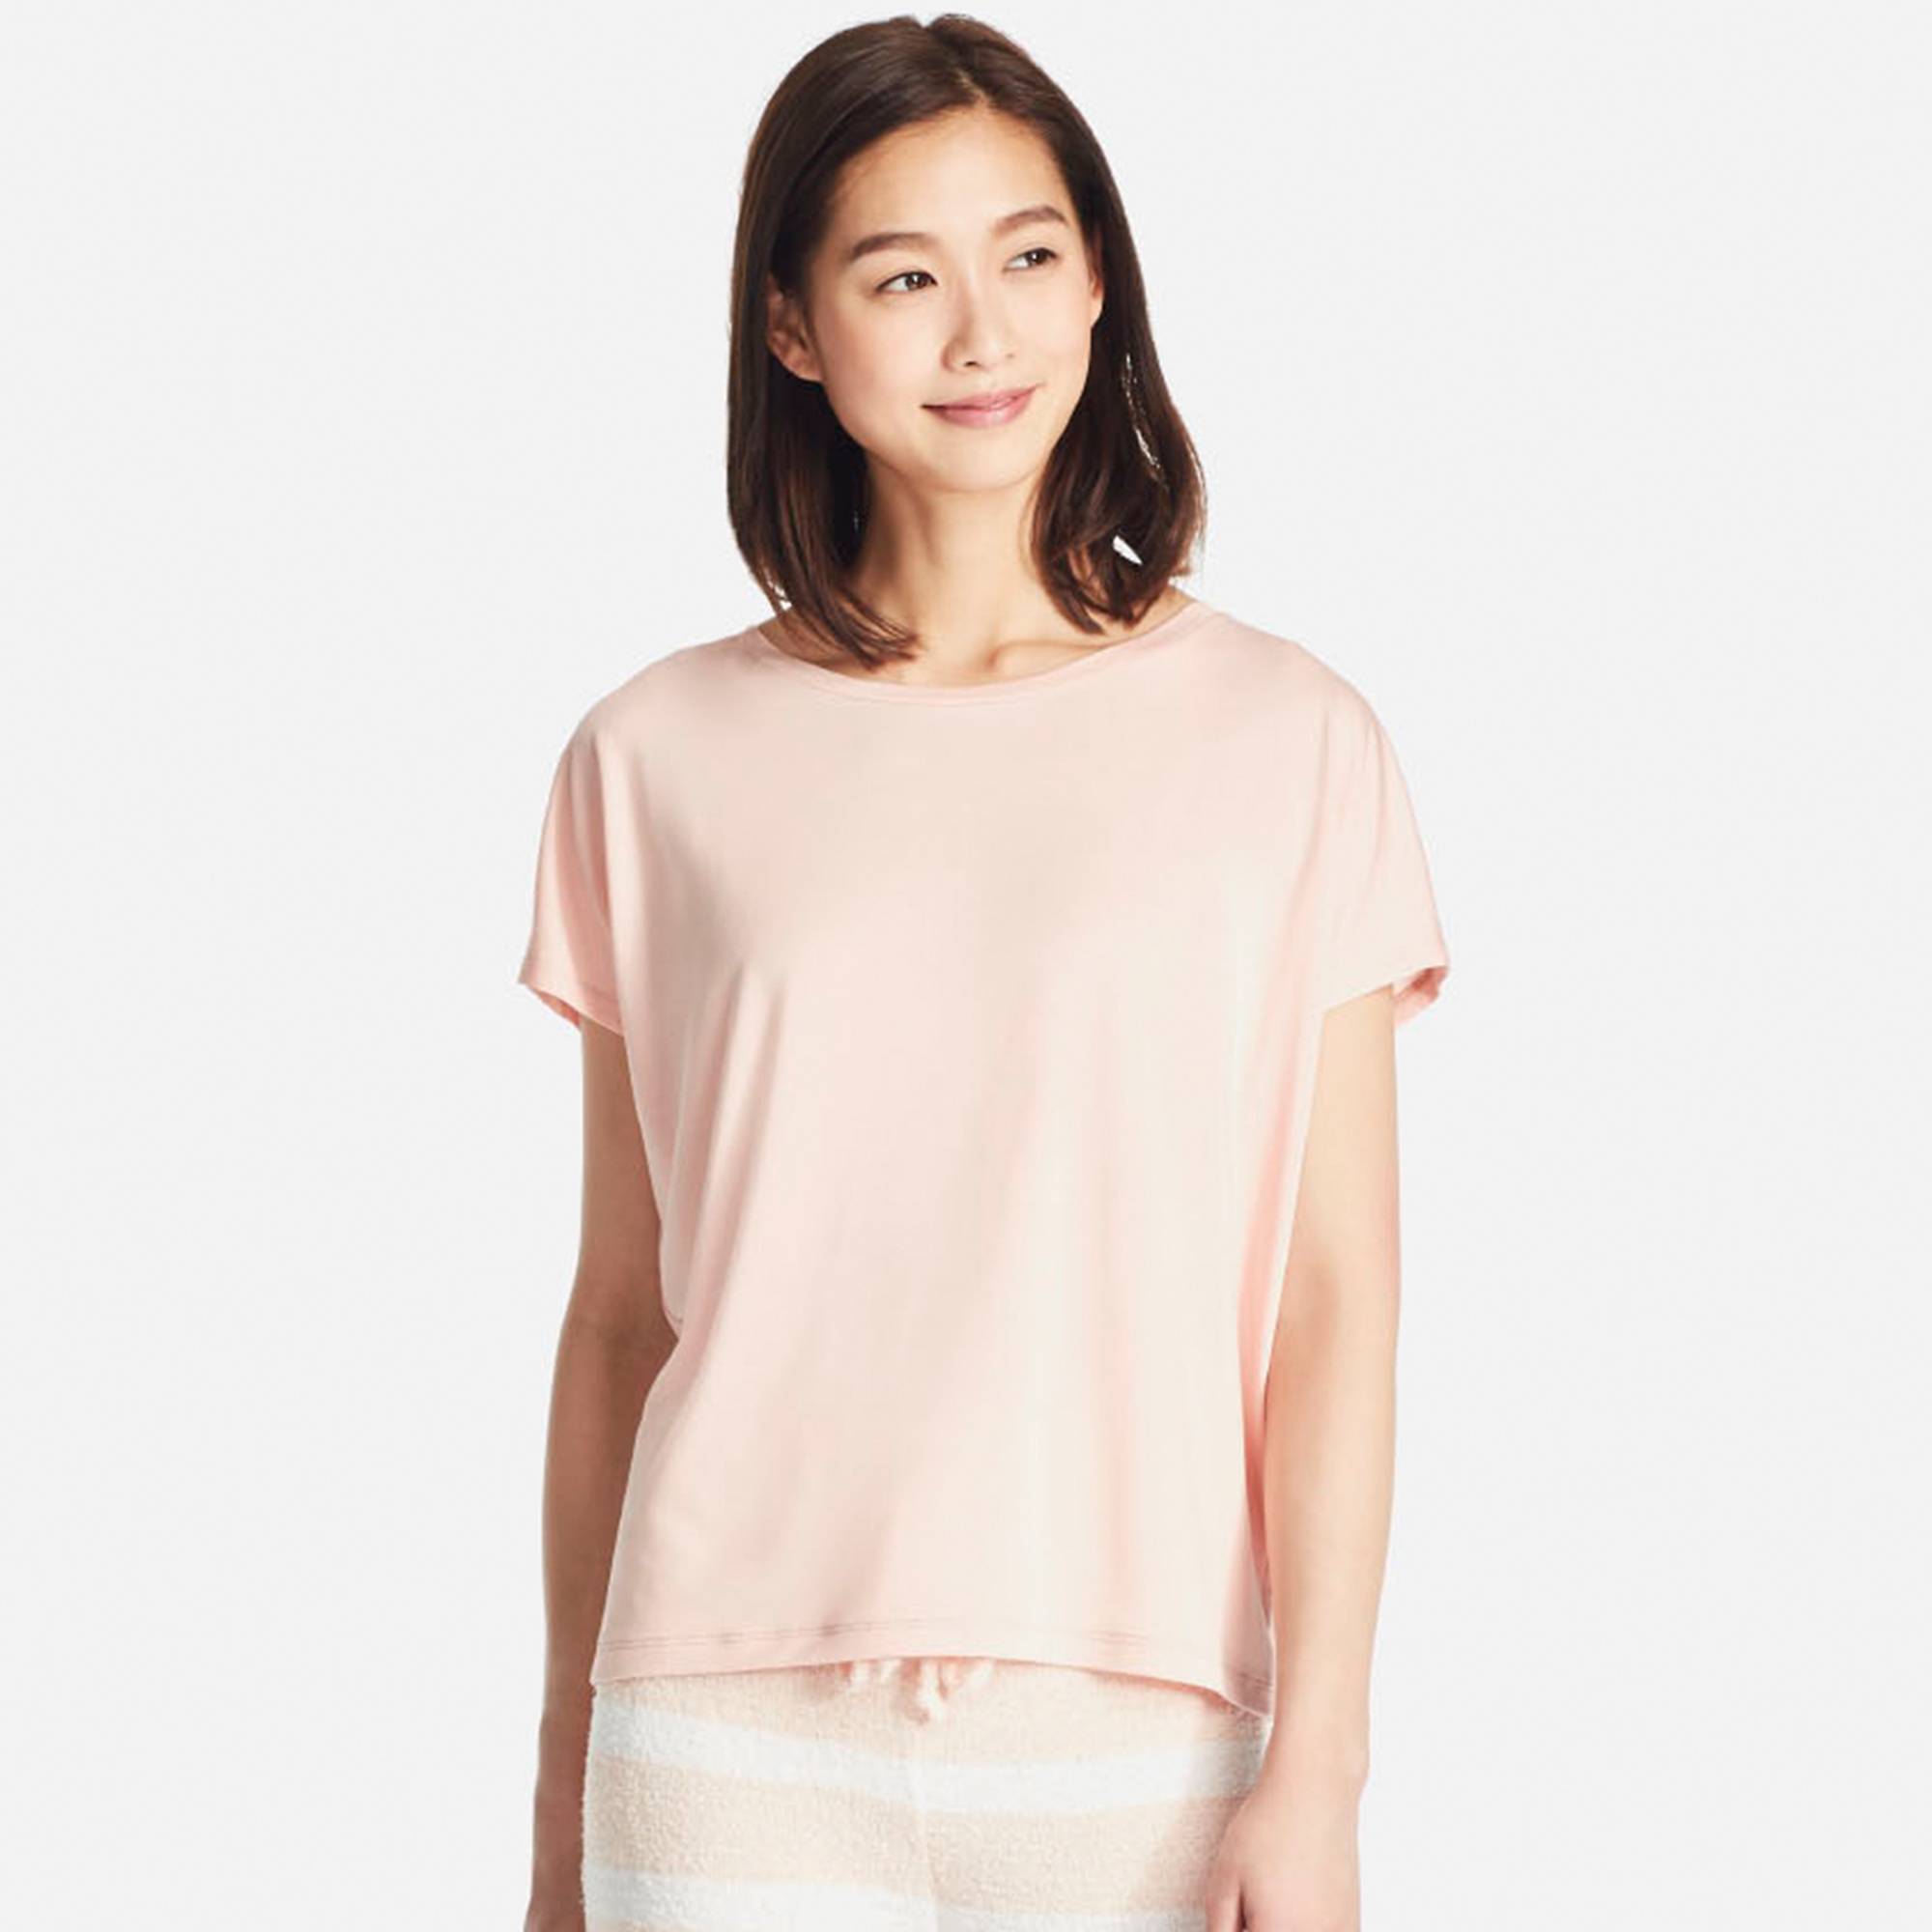 uniqlo drape neck tee in pink as worn by a model of east asian heritage